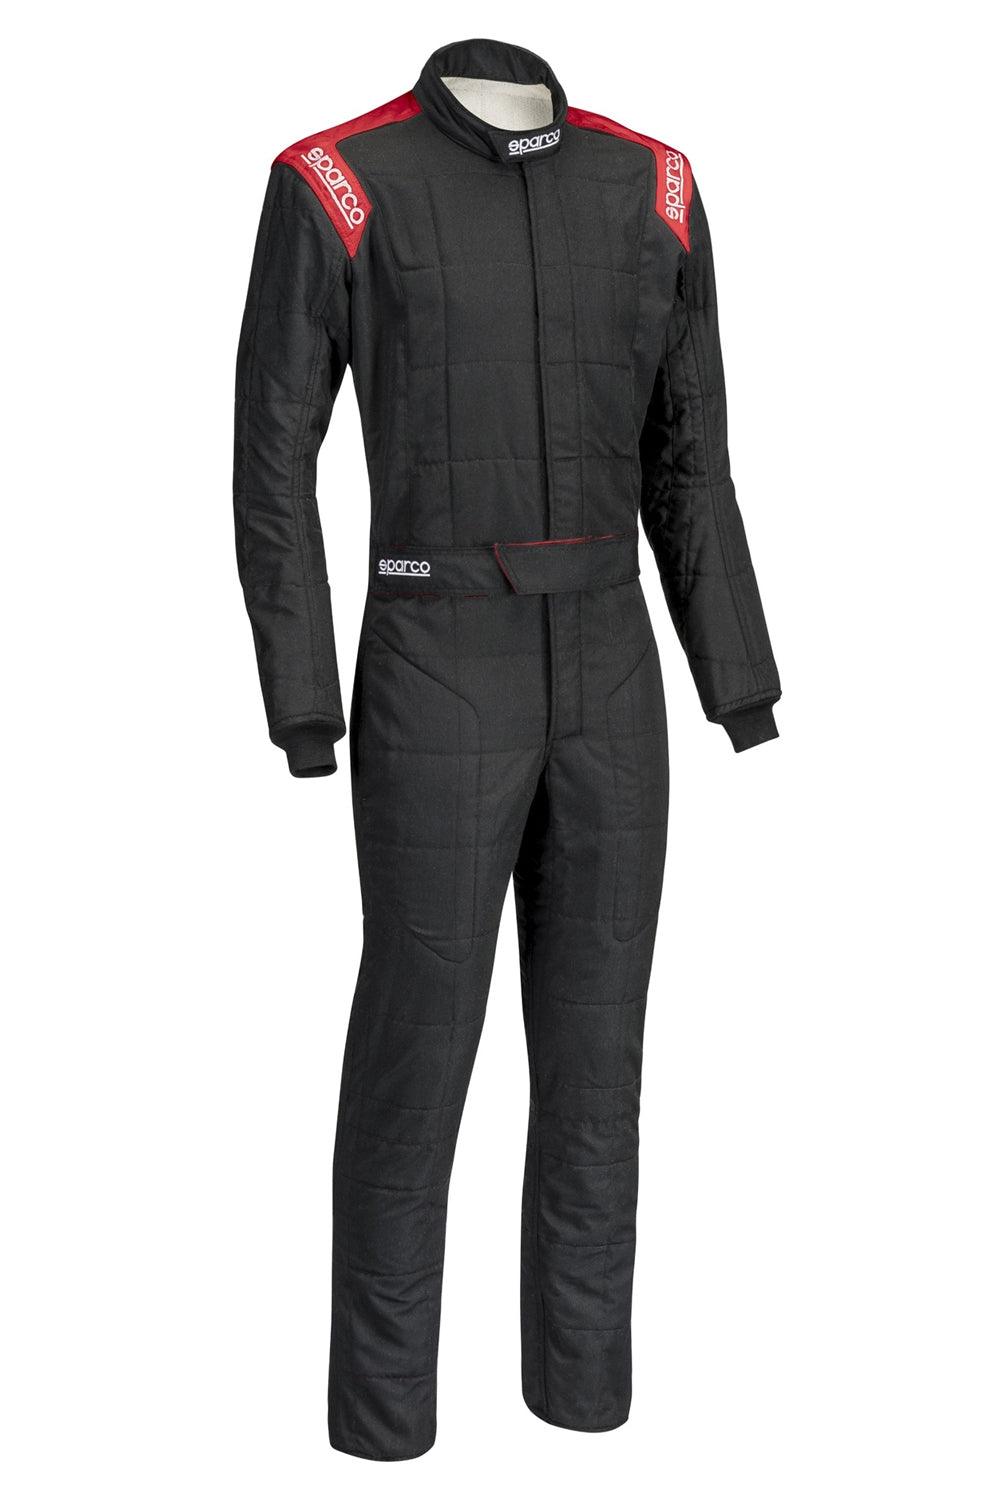 Suit Conquest Boot Cut Blk/Red Small / Medium - Burlile Performance Products